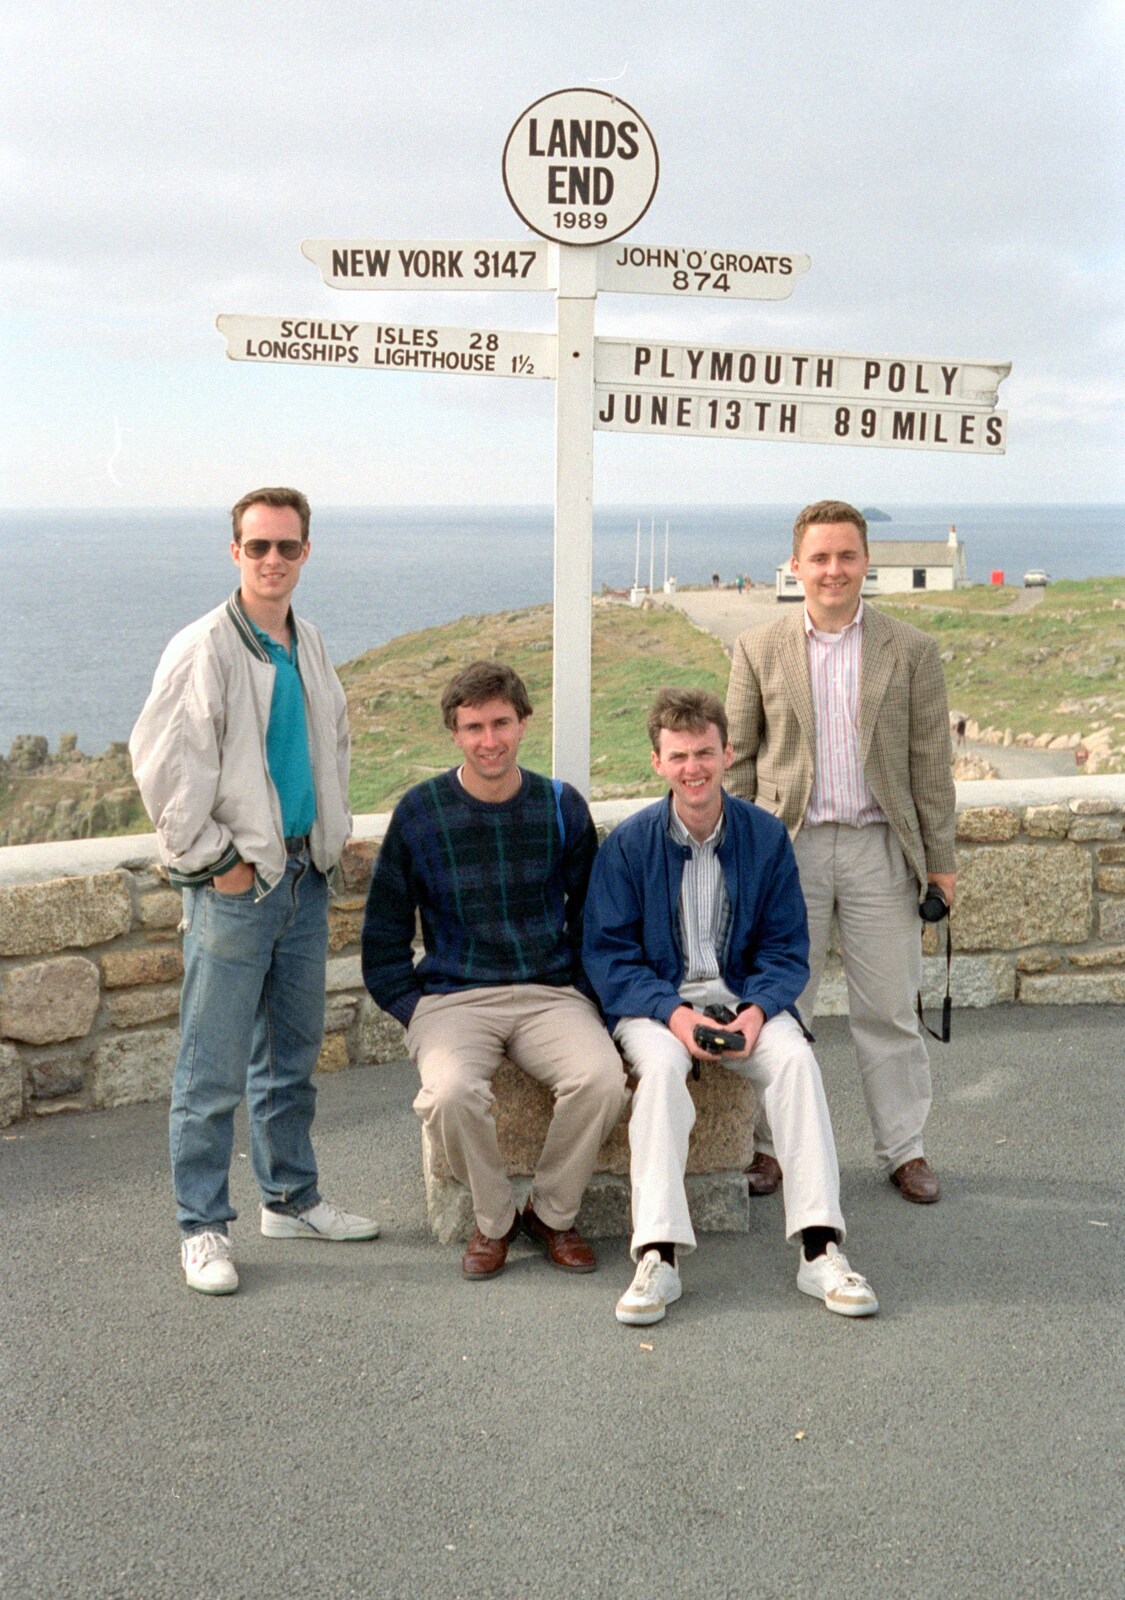 The lads at the Land's End sign from Uni: An End-of-it-all Trip to Land's End, Cornwall - 13th June 1989